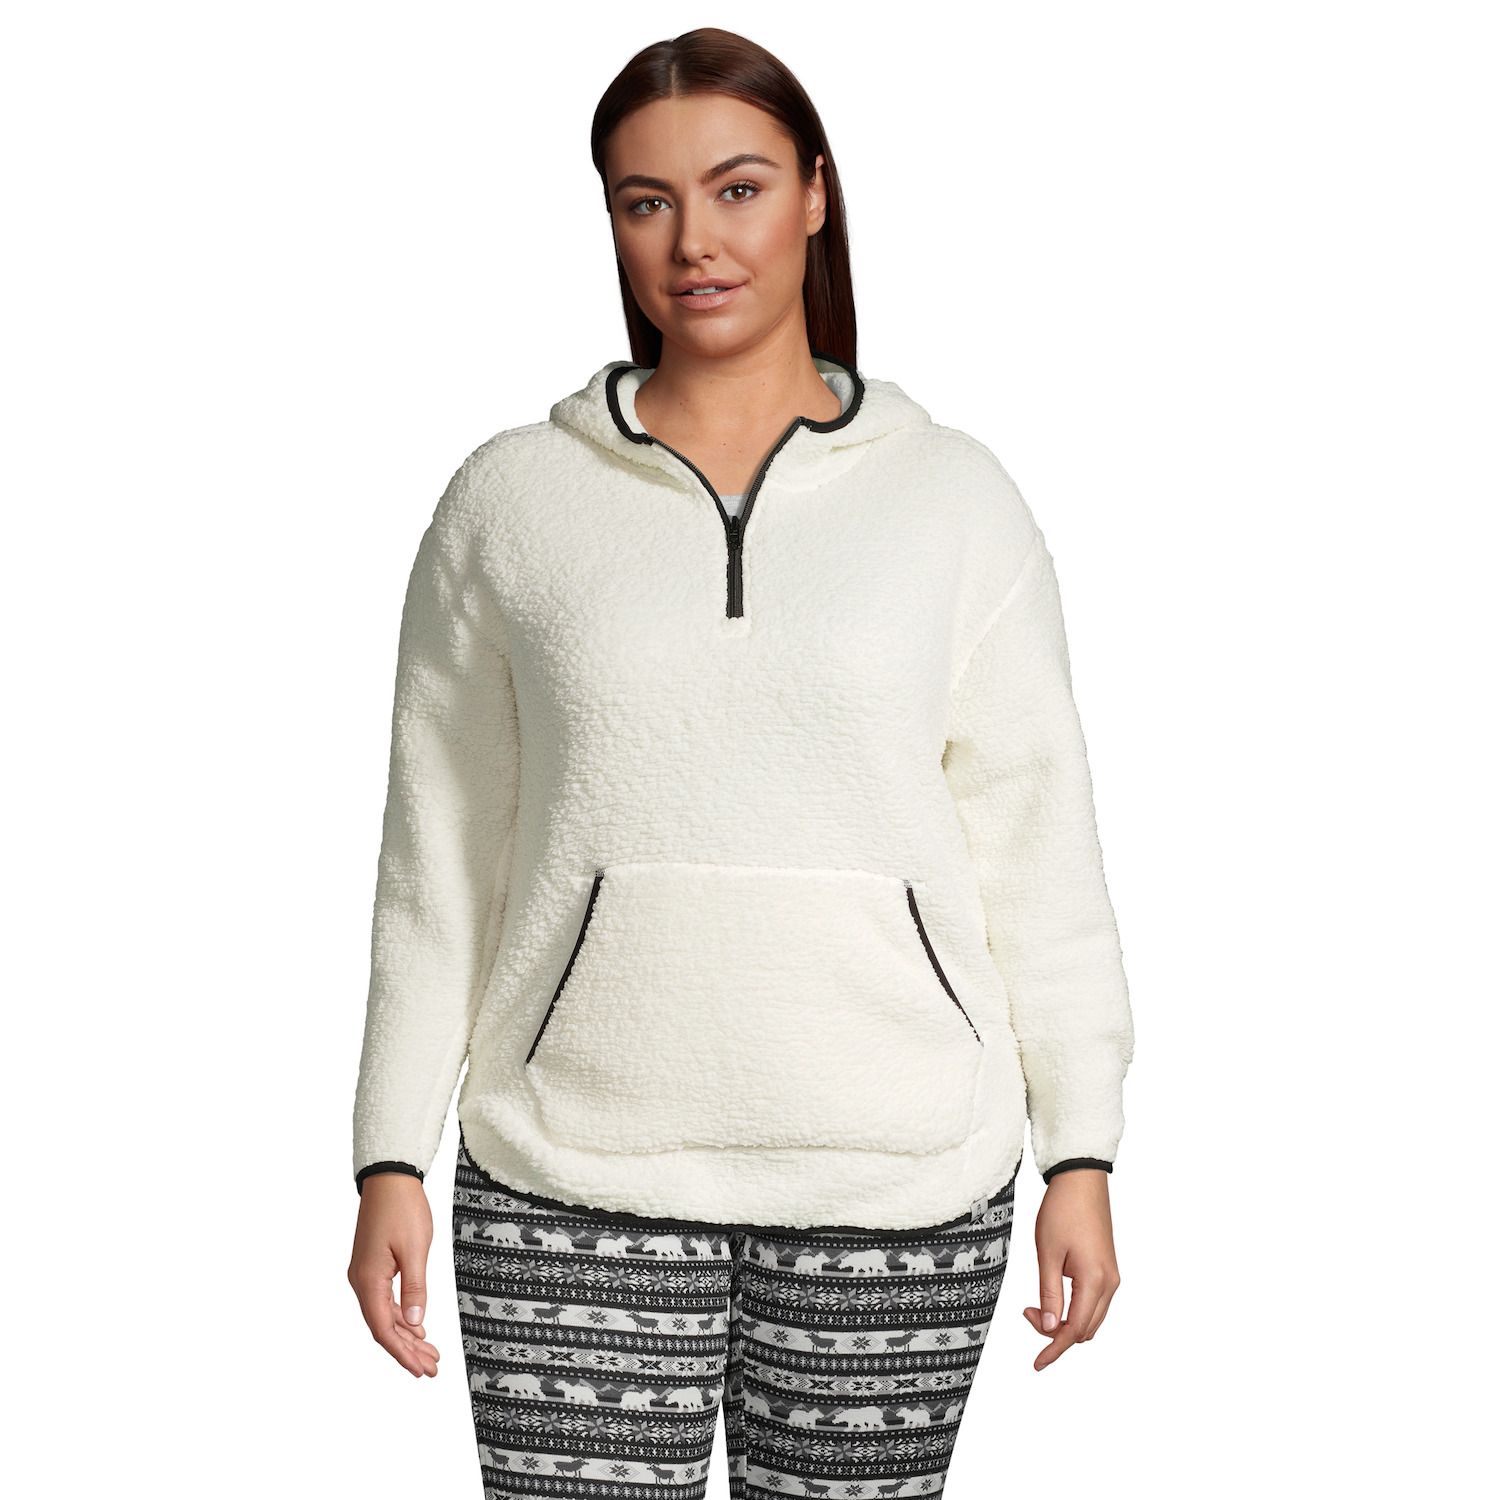 Image for Lands' End Plus Size 1/4-Zip Sherpa Fleece Hoodie at Kohl's.